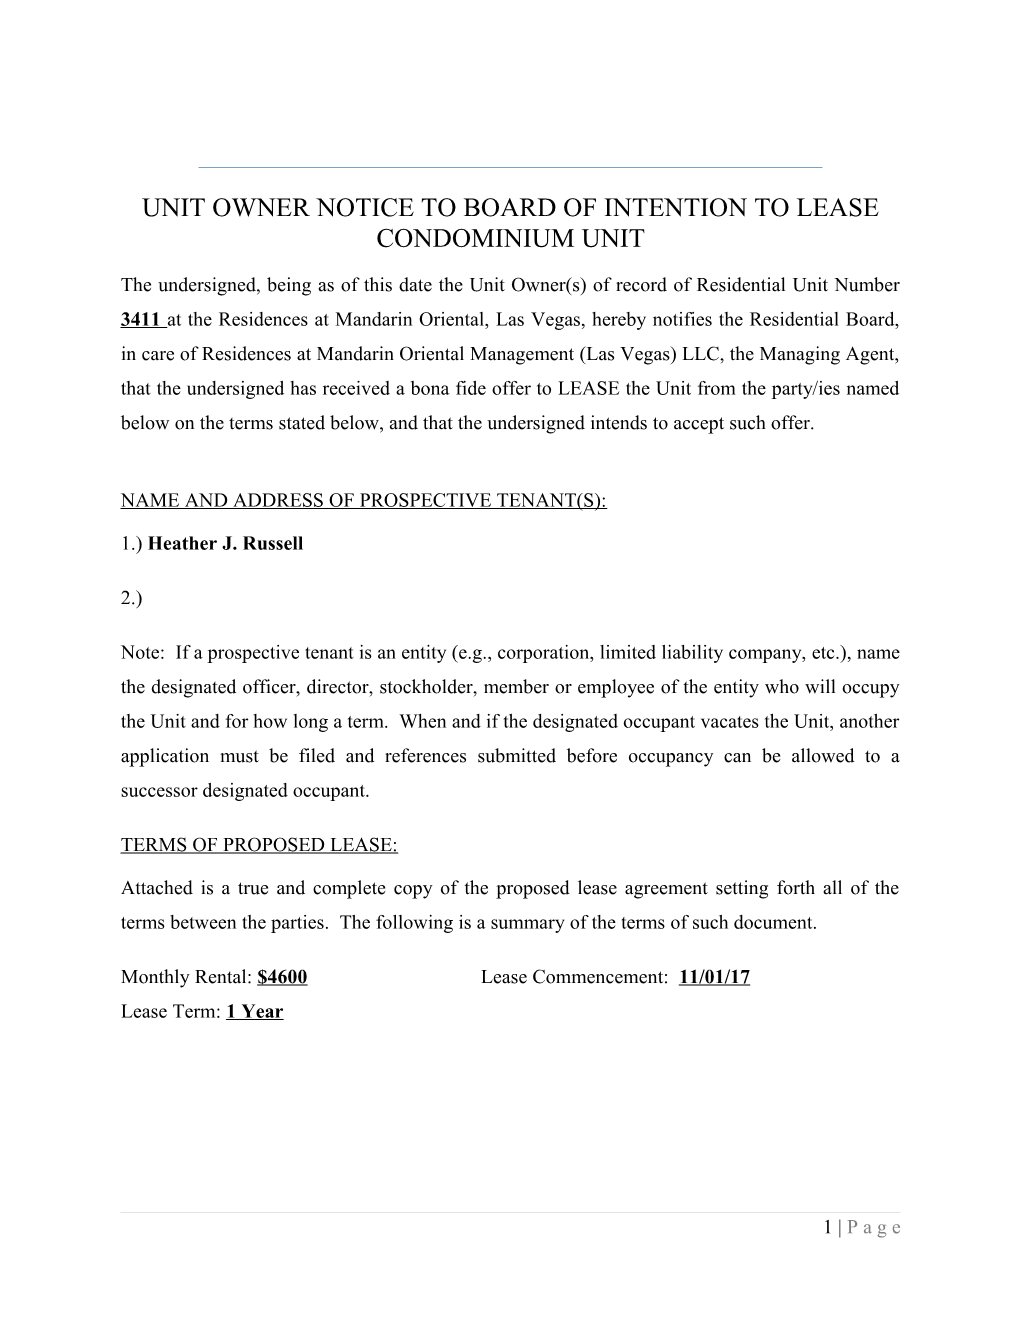 Unit Owner Notice to Board of Intention to Lease Condominium Unit